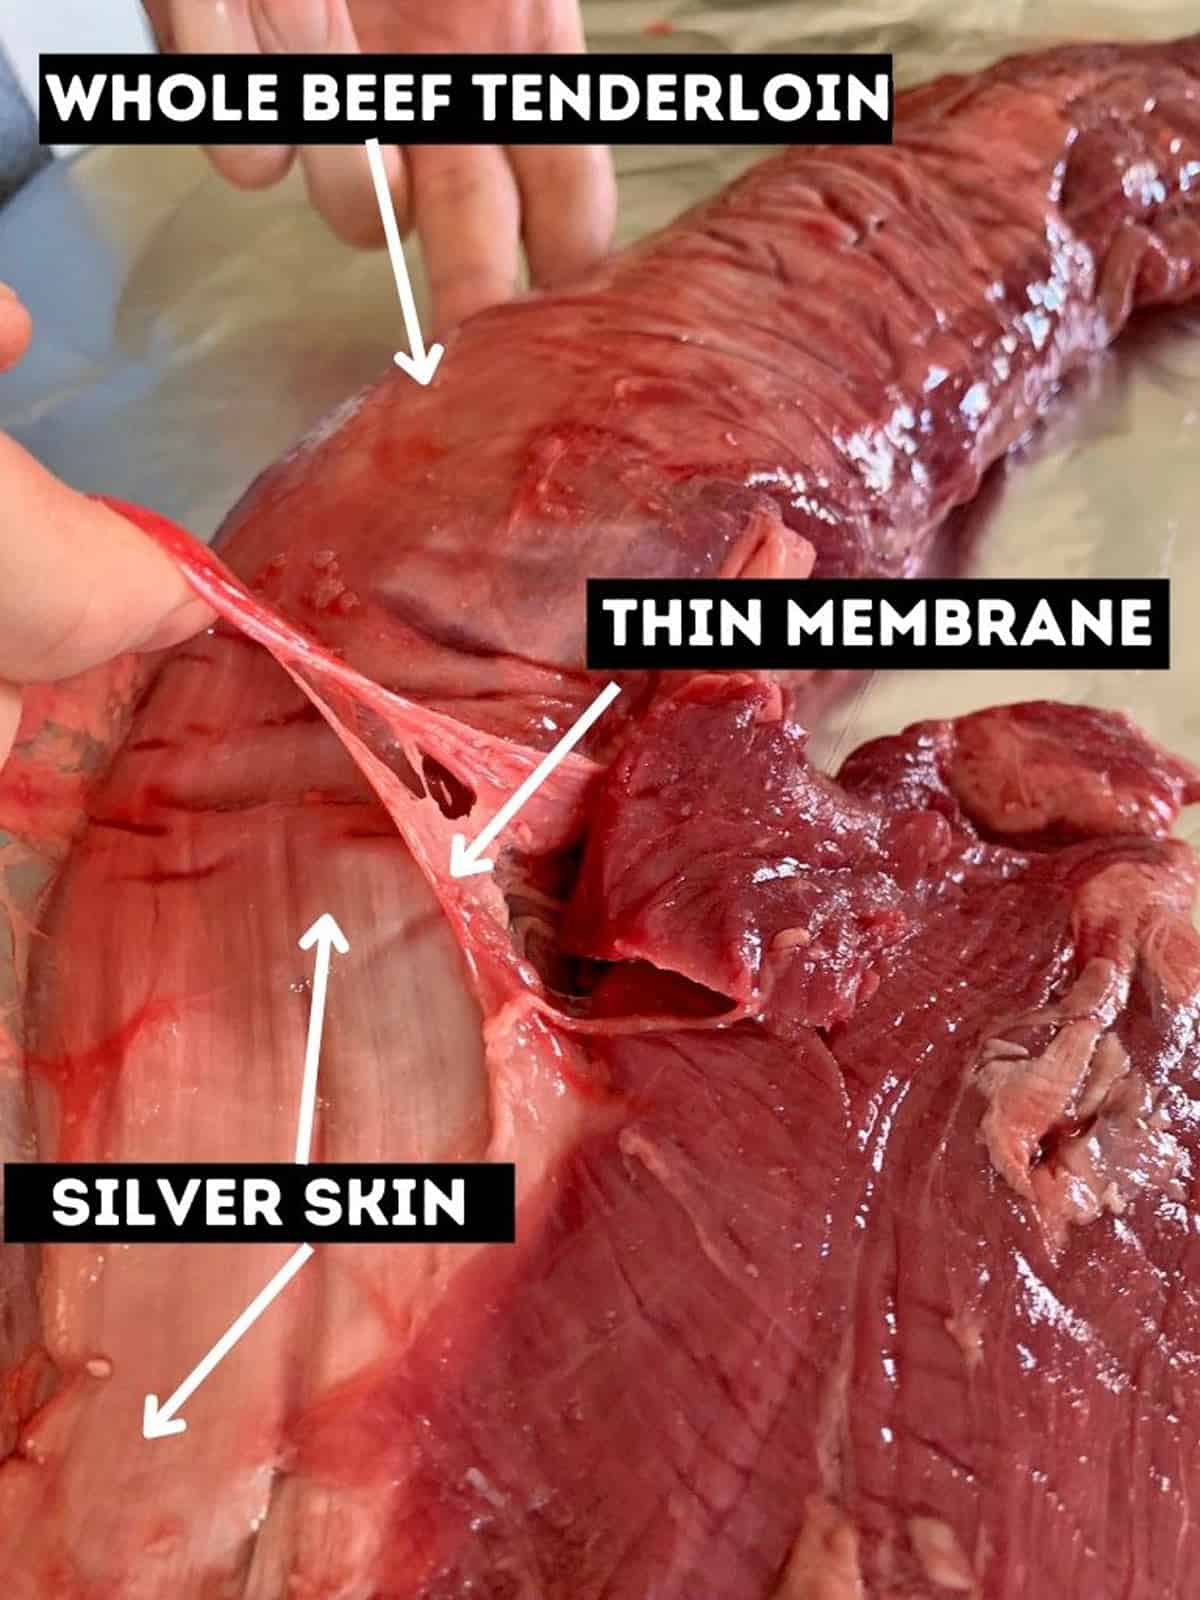 Trimming the silver skin from a whole beef tenderloin.